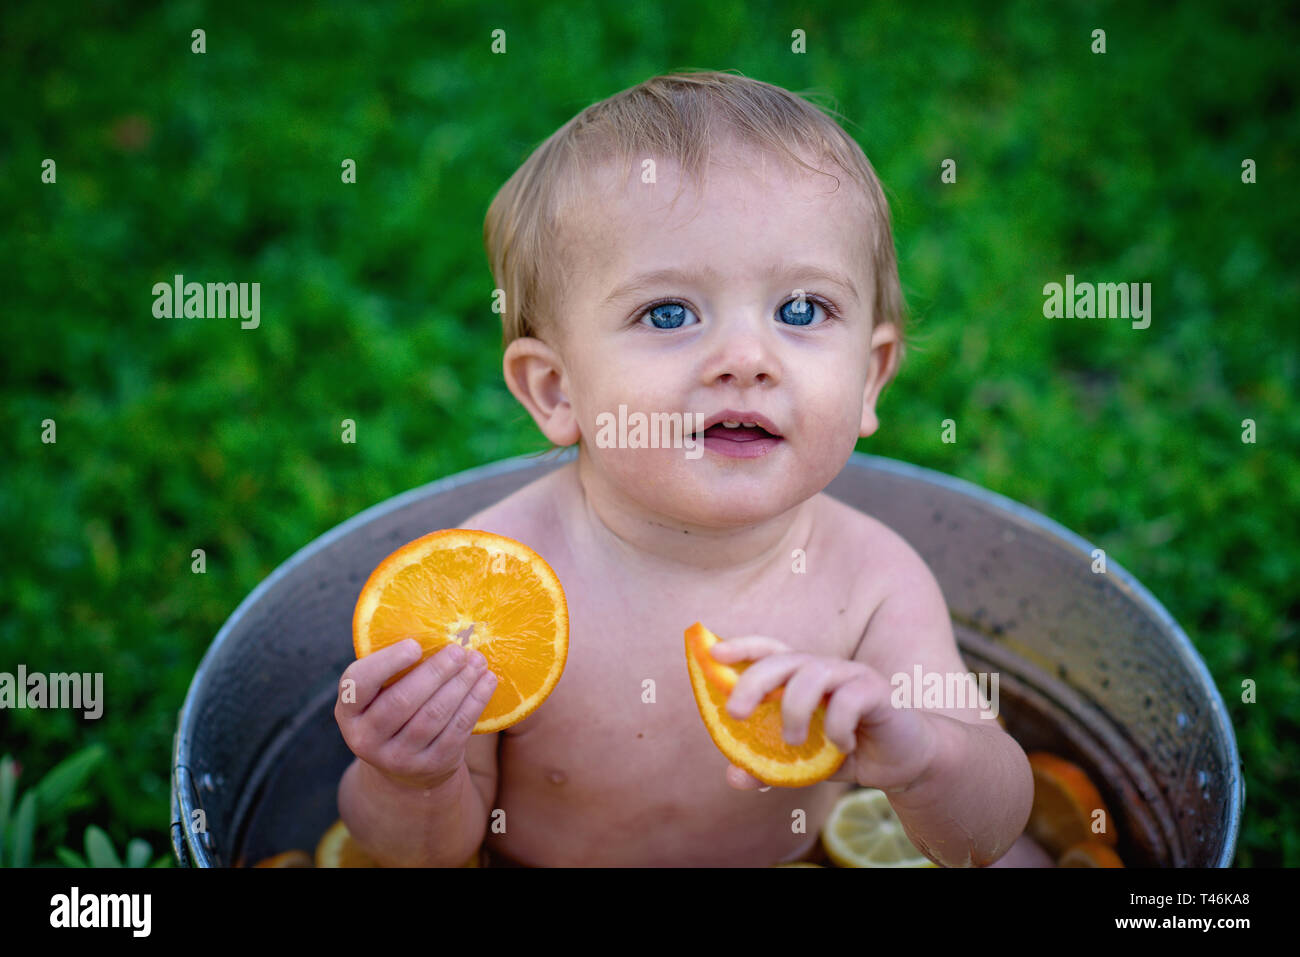 Smiling Baby in bucket with fruit Stock Photo